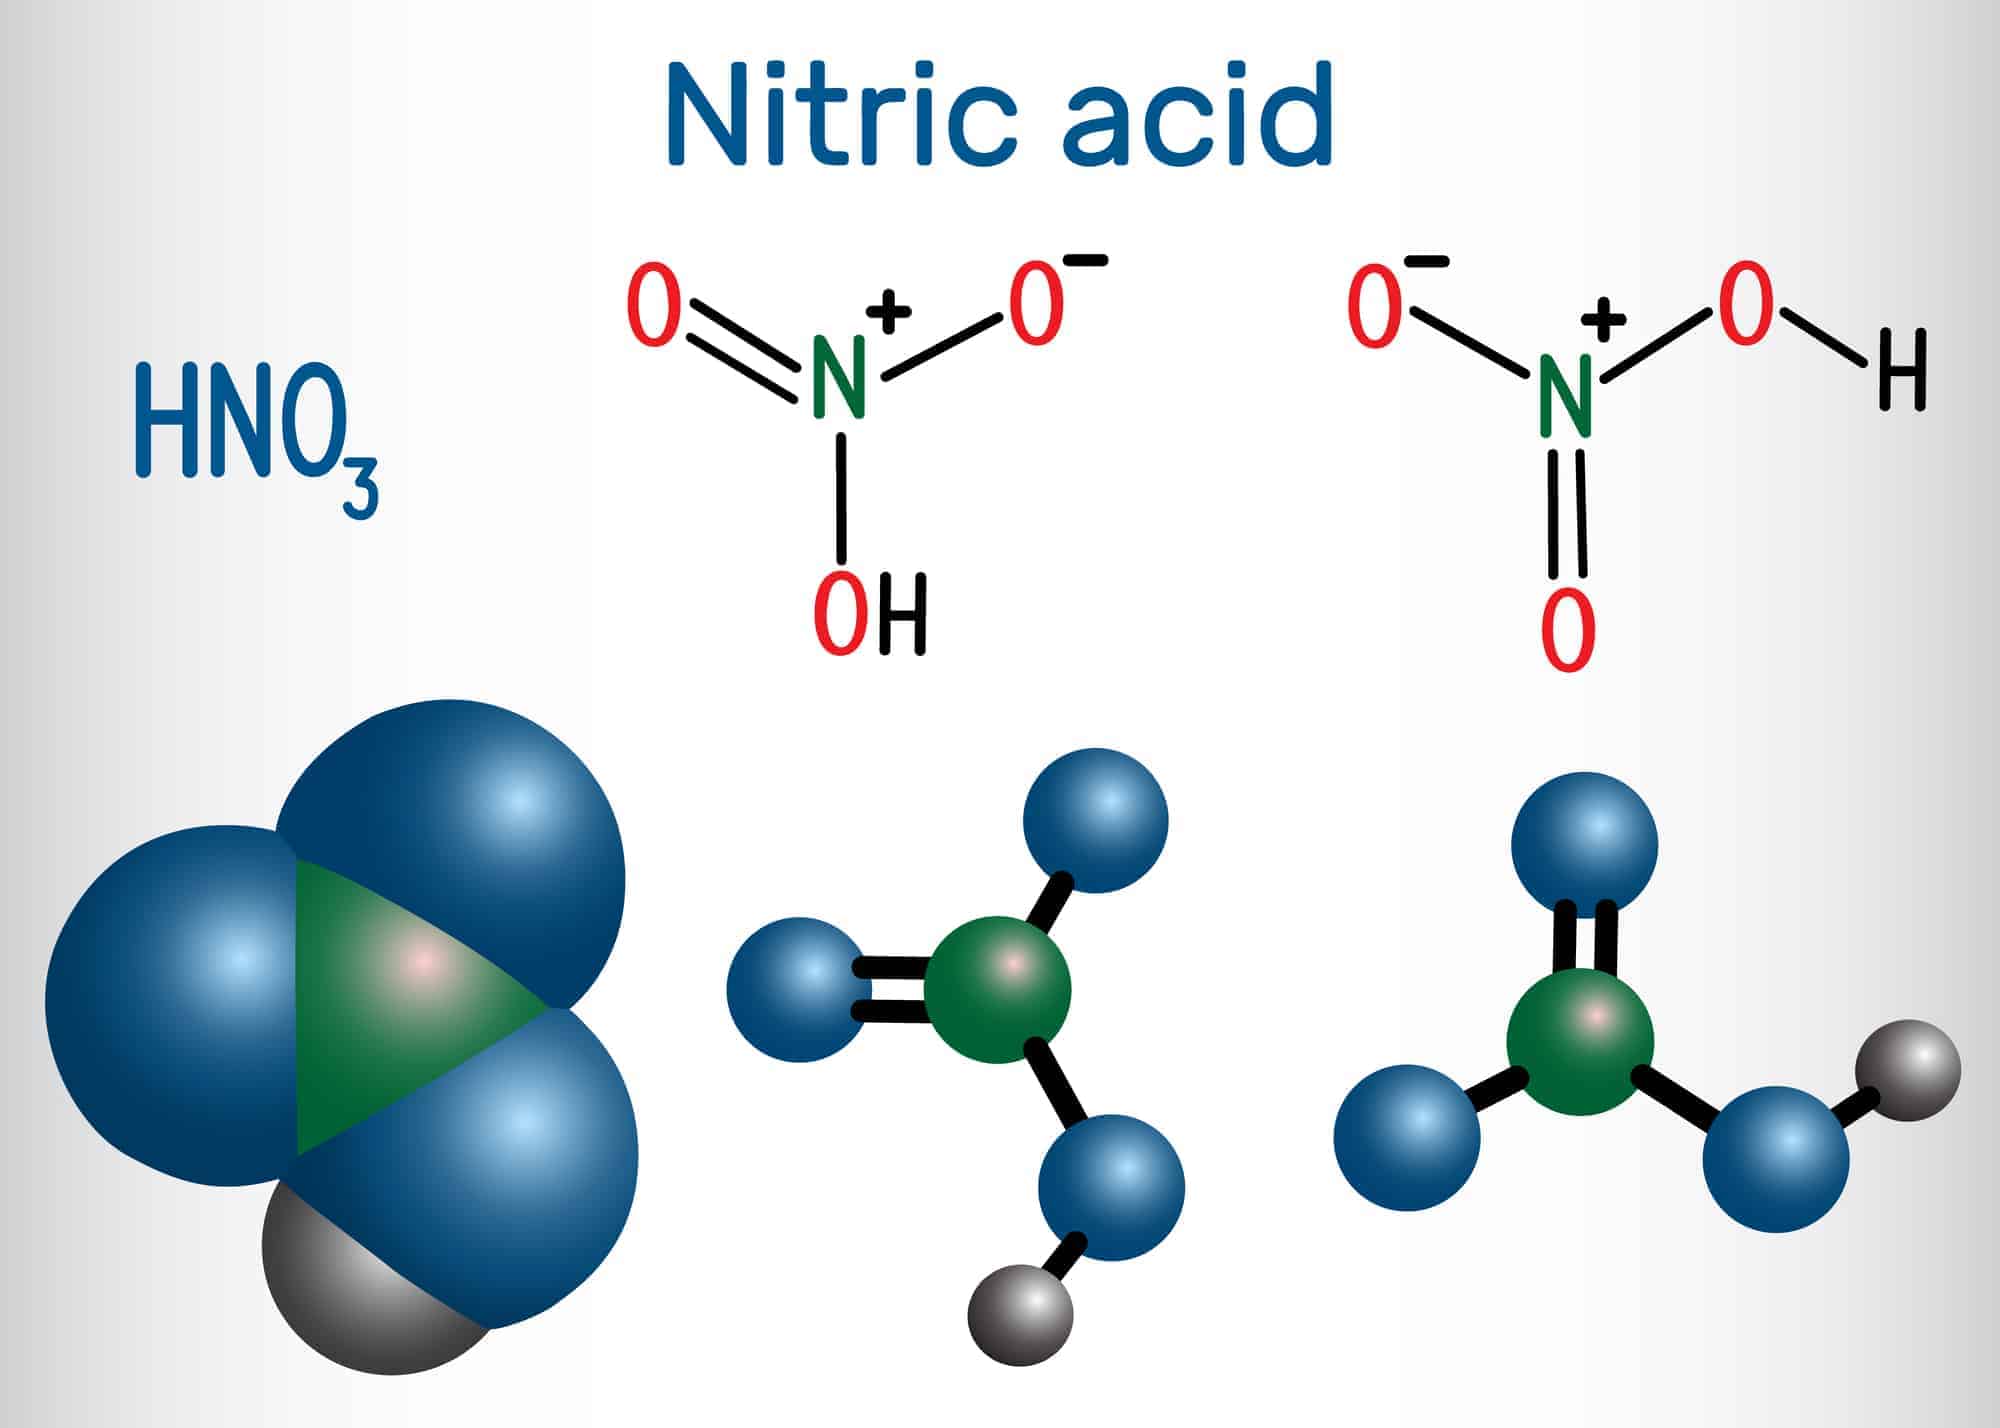 19-interesting-facts-about-nitric-acid